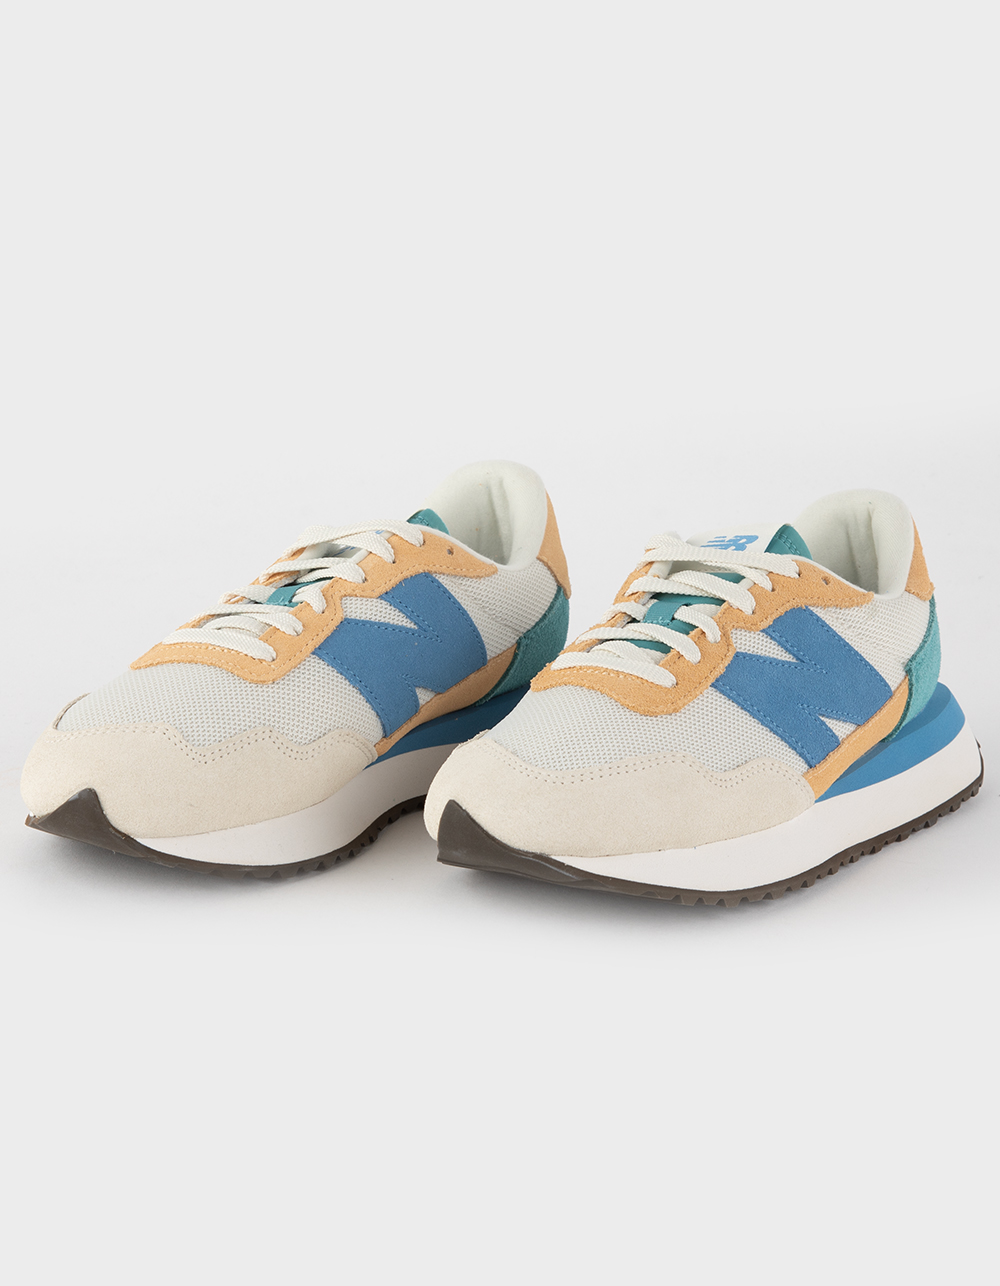 NEW BALANCE Shoes - MULTI | Tillys